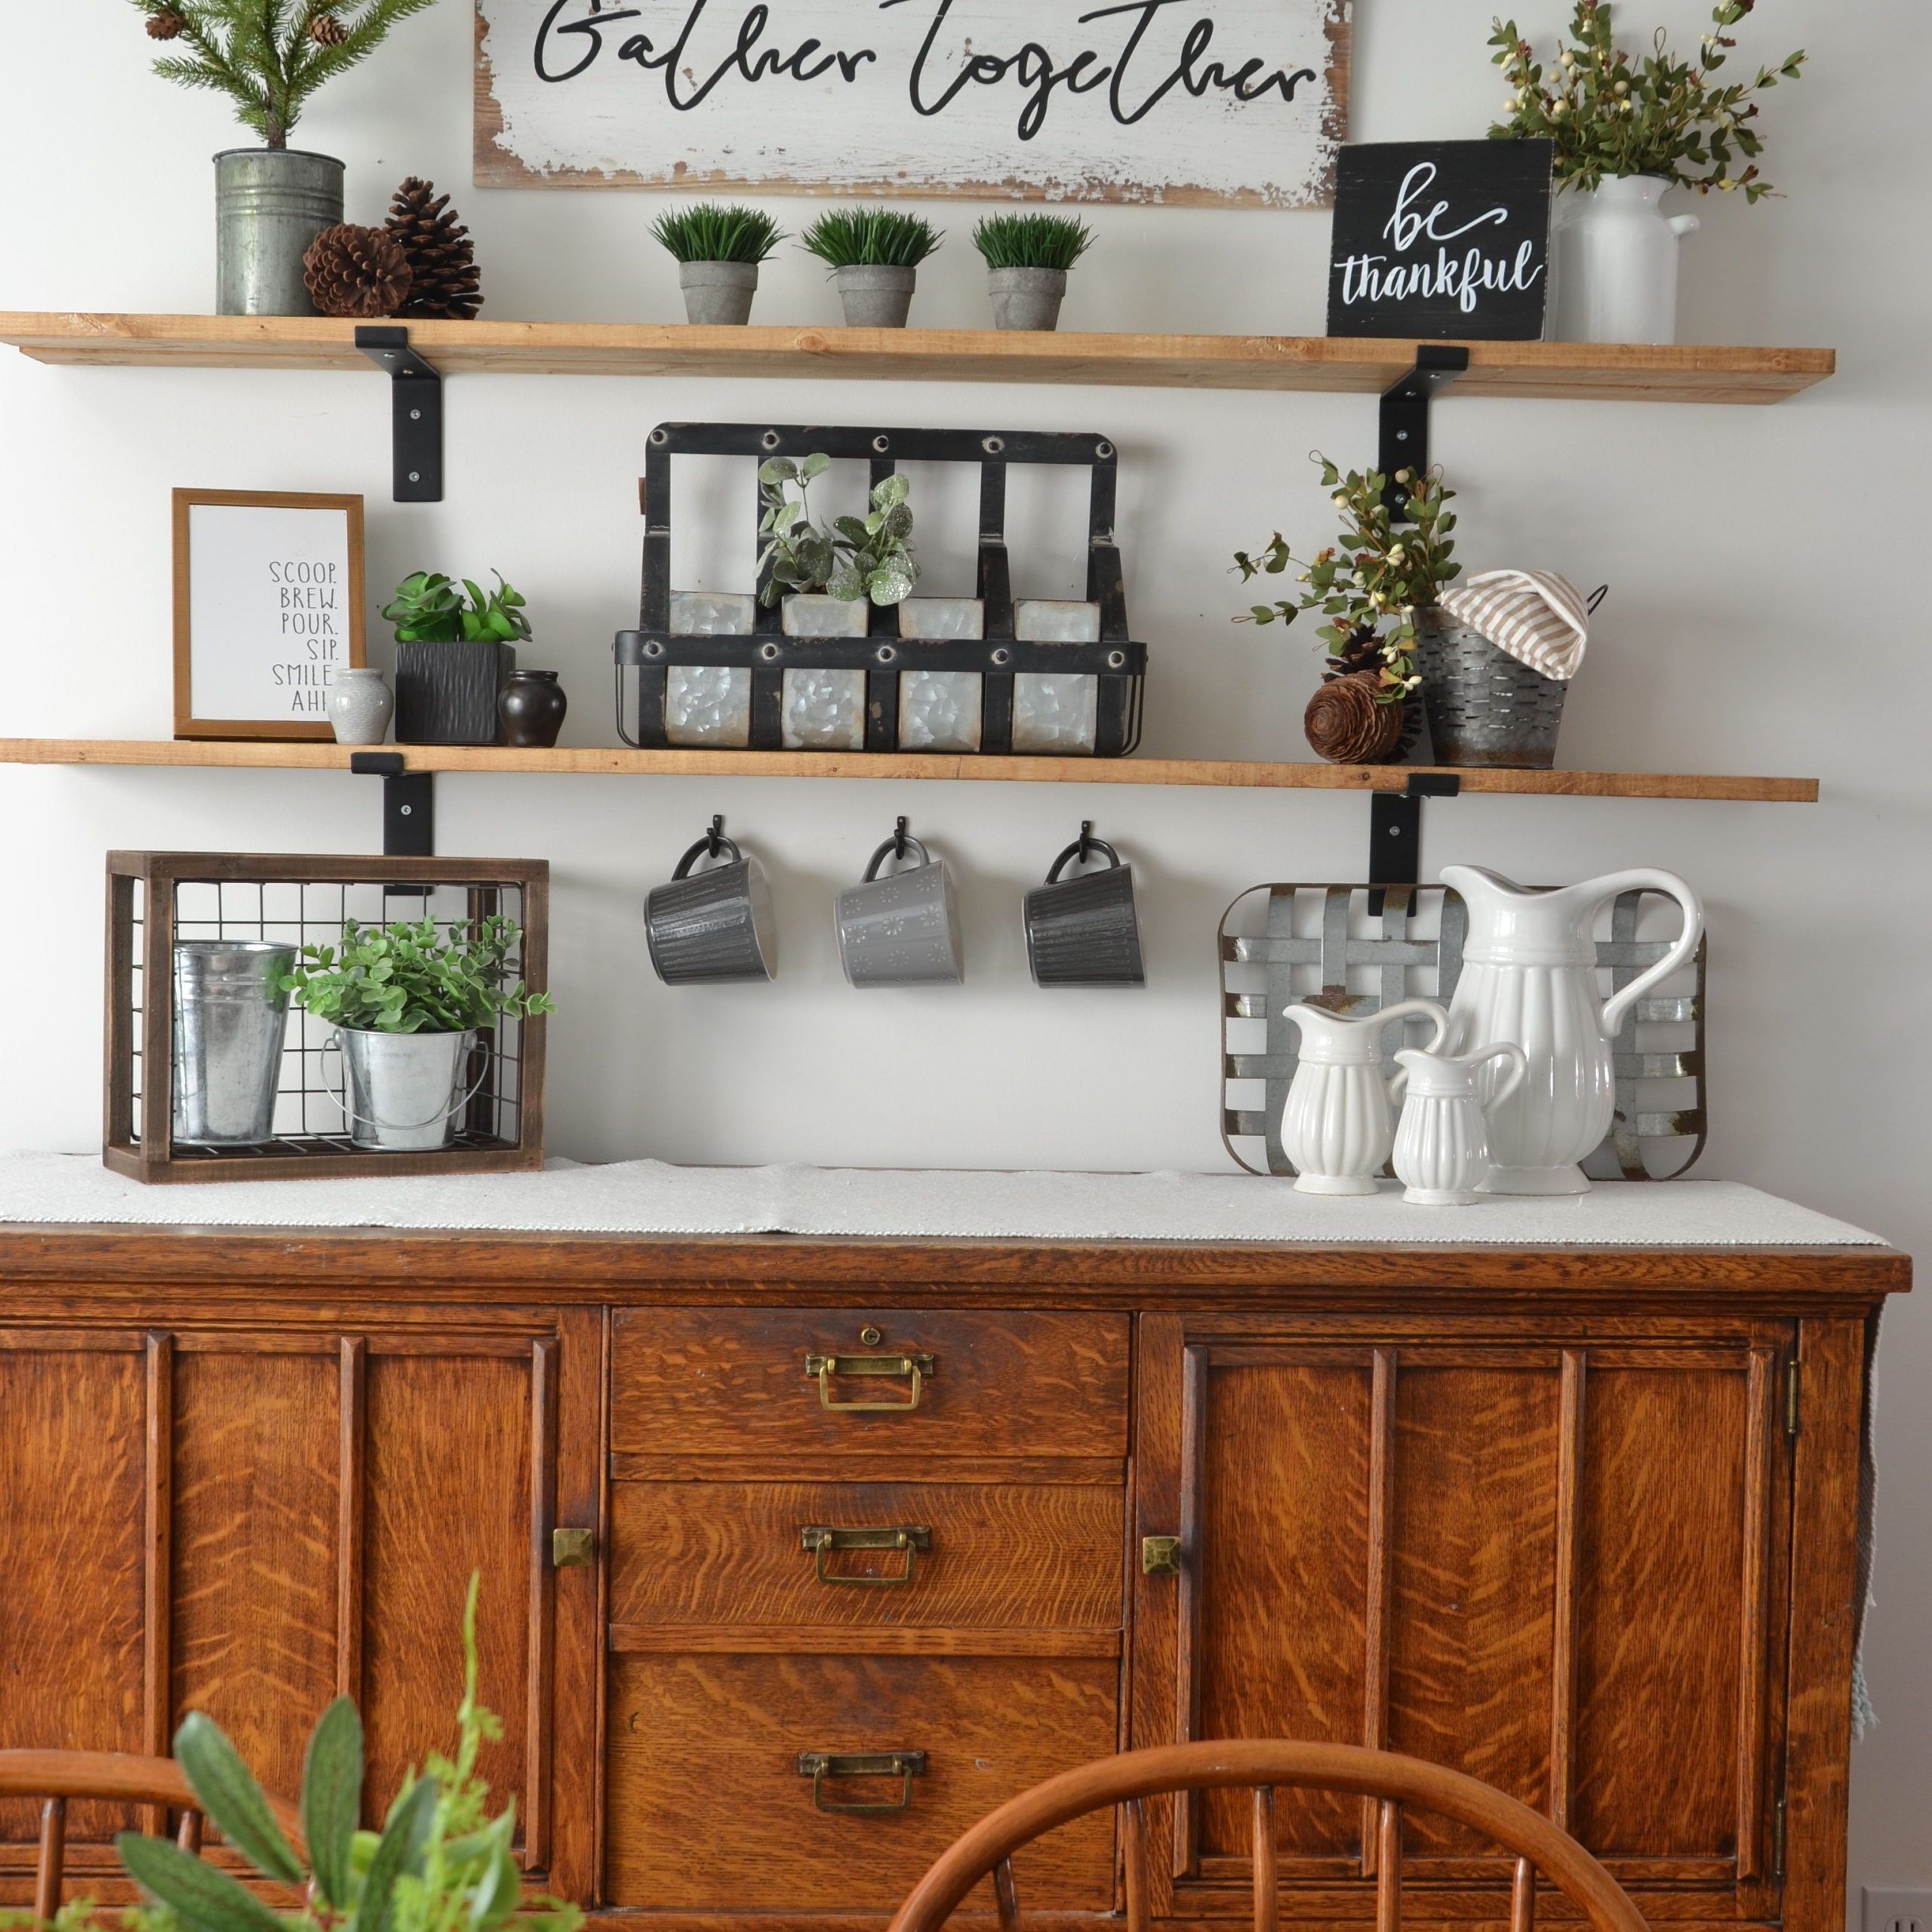 How To Make Fixer Upper Style Farmhouse Shelves | Farmhouse Shelves Diy With Farmhouse Stands With Shelves (View 5 of 20)